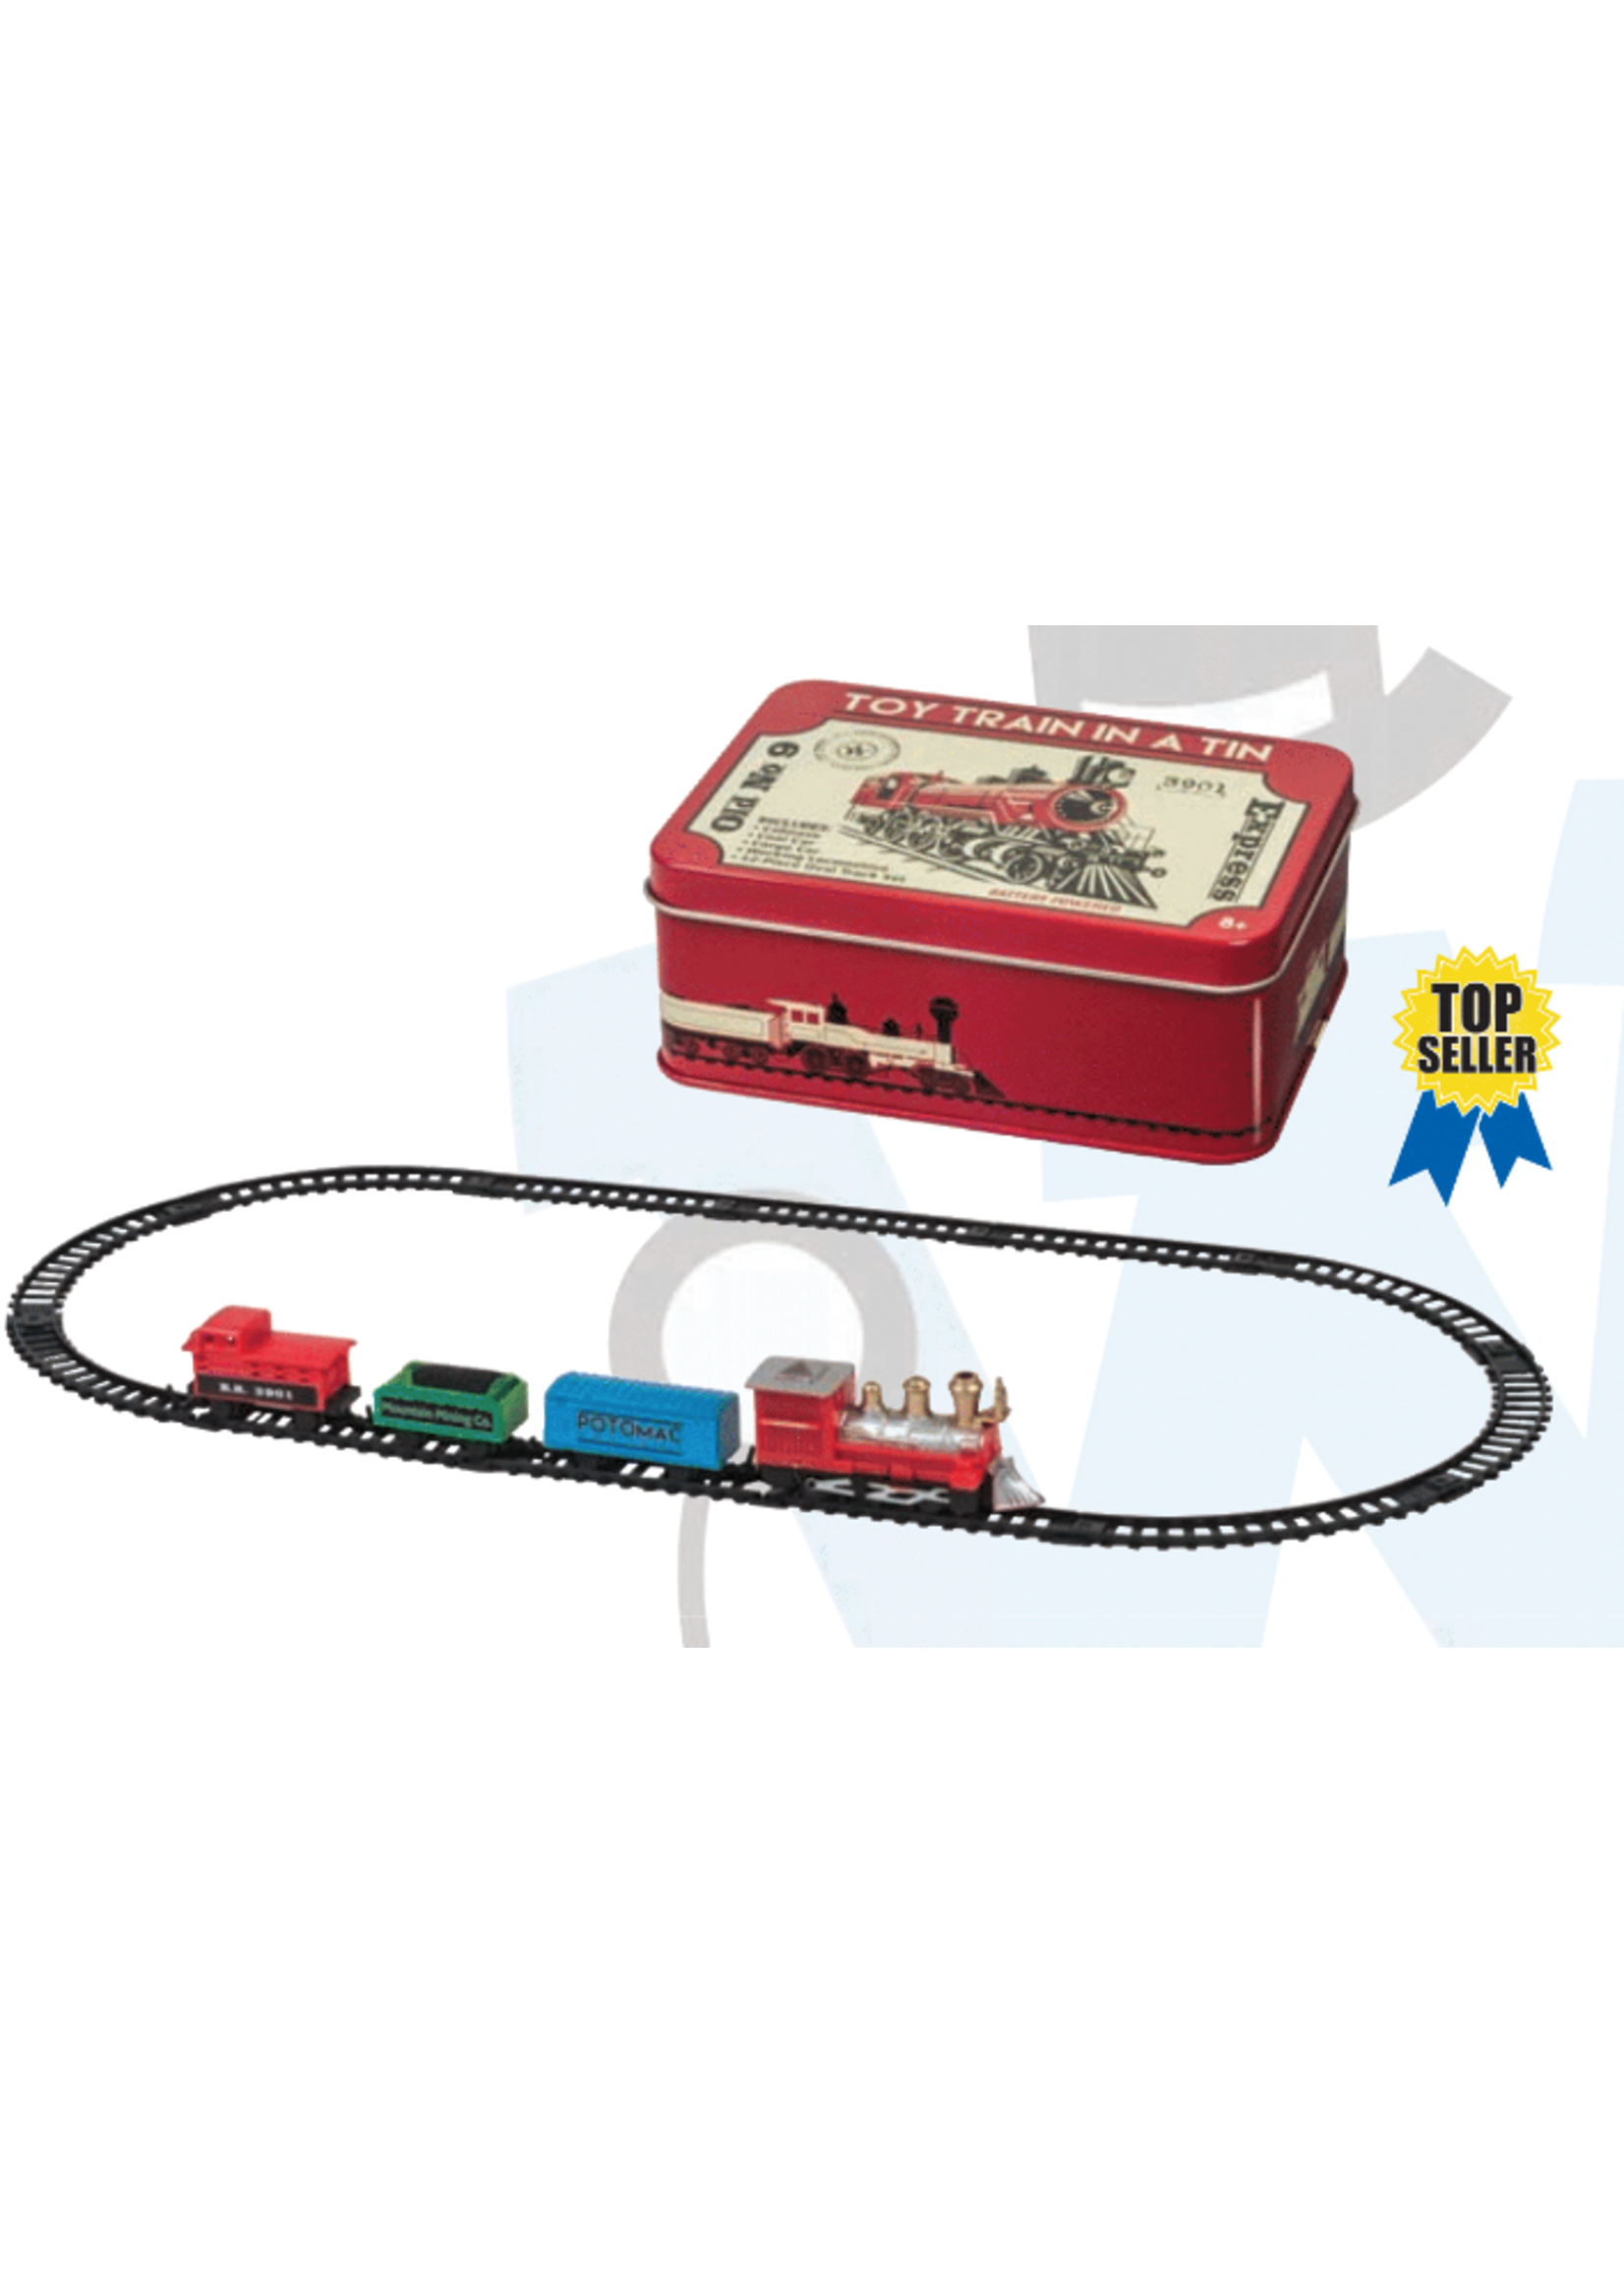 Toy Train in a Tin